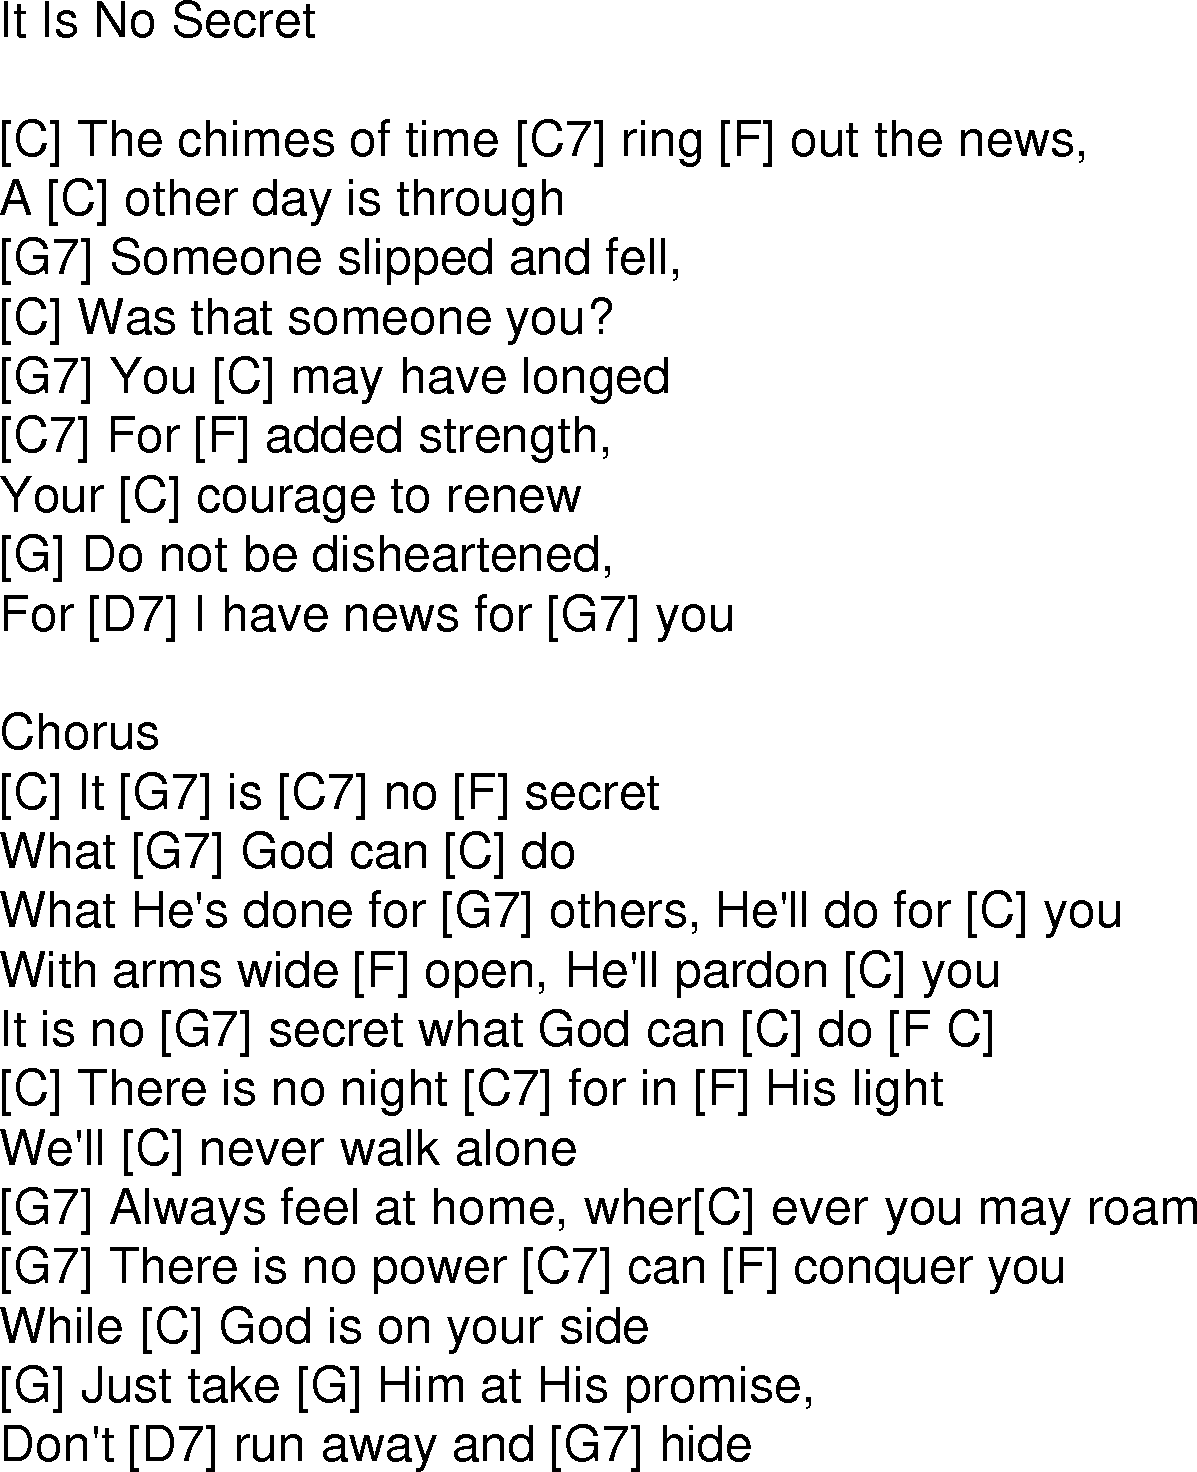 Old time song lyrics with chords for It Is No Secret C